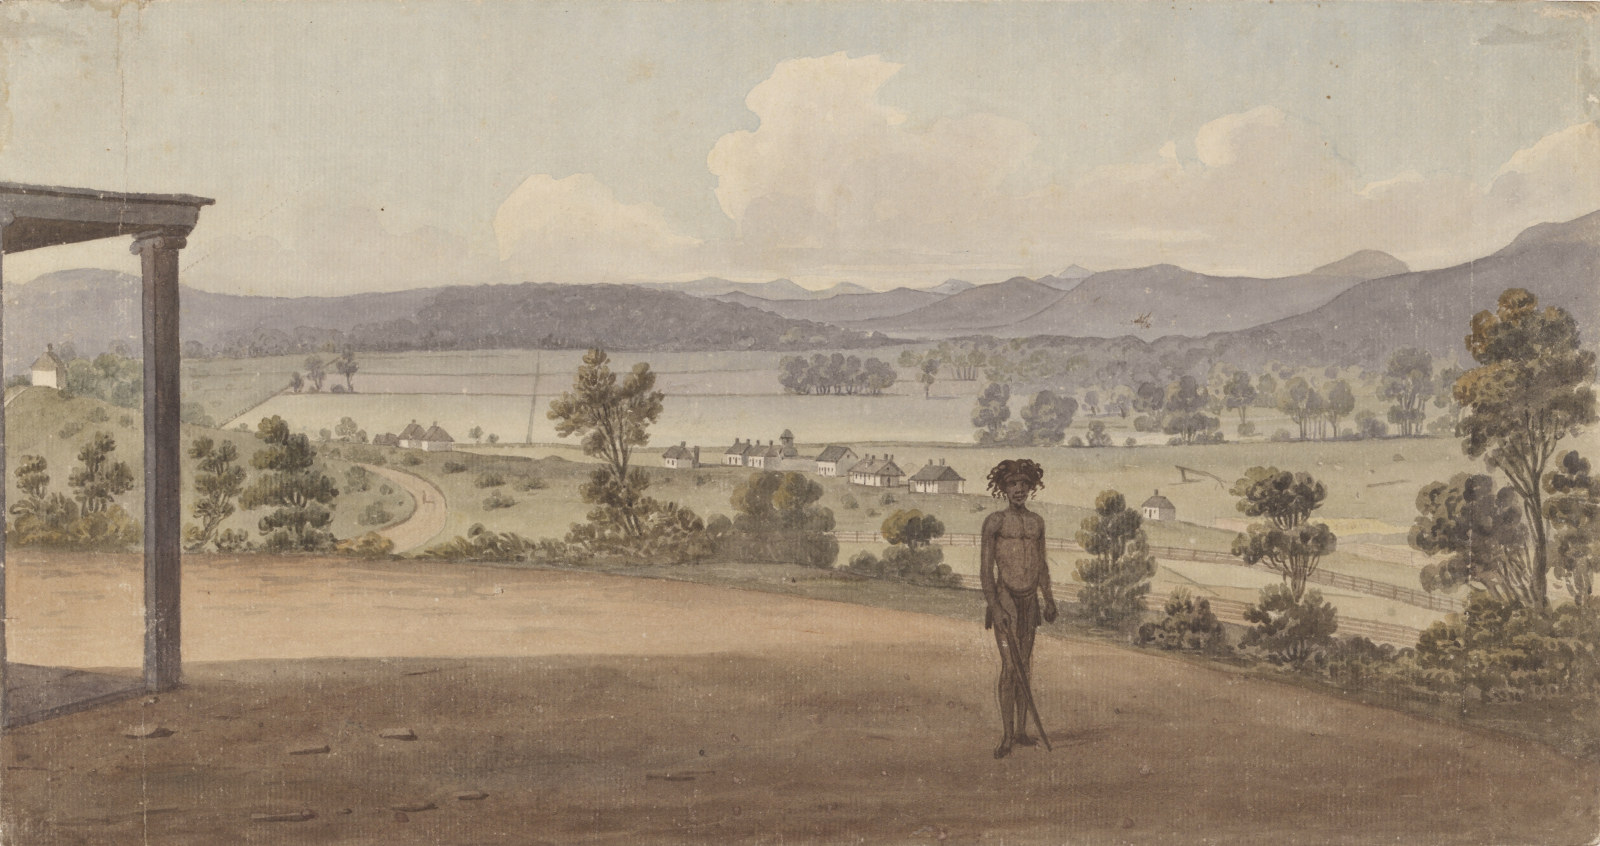 Illustration of landscape scene with Aboriginal person in foreground.